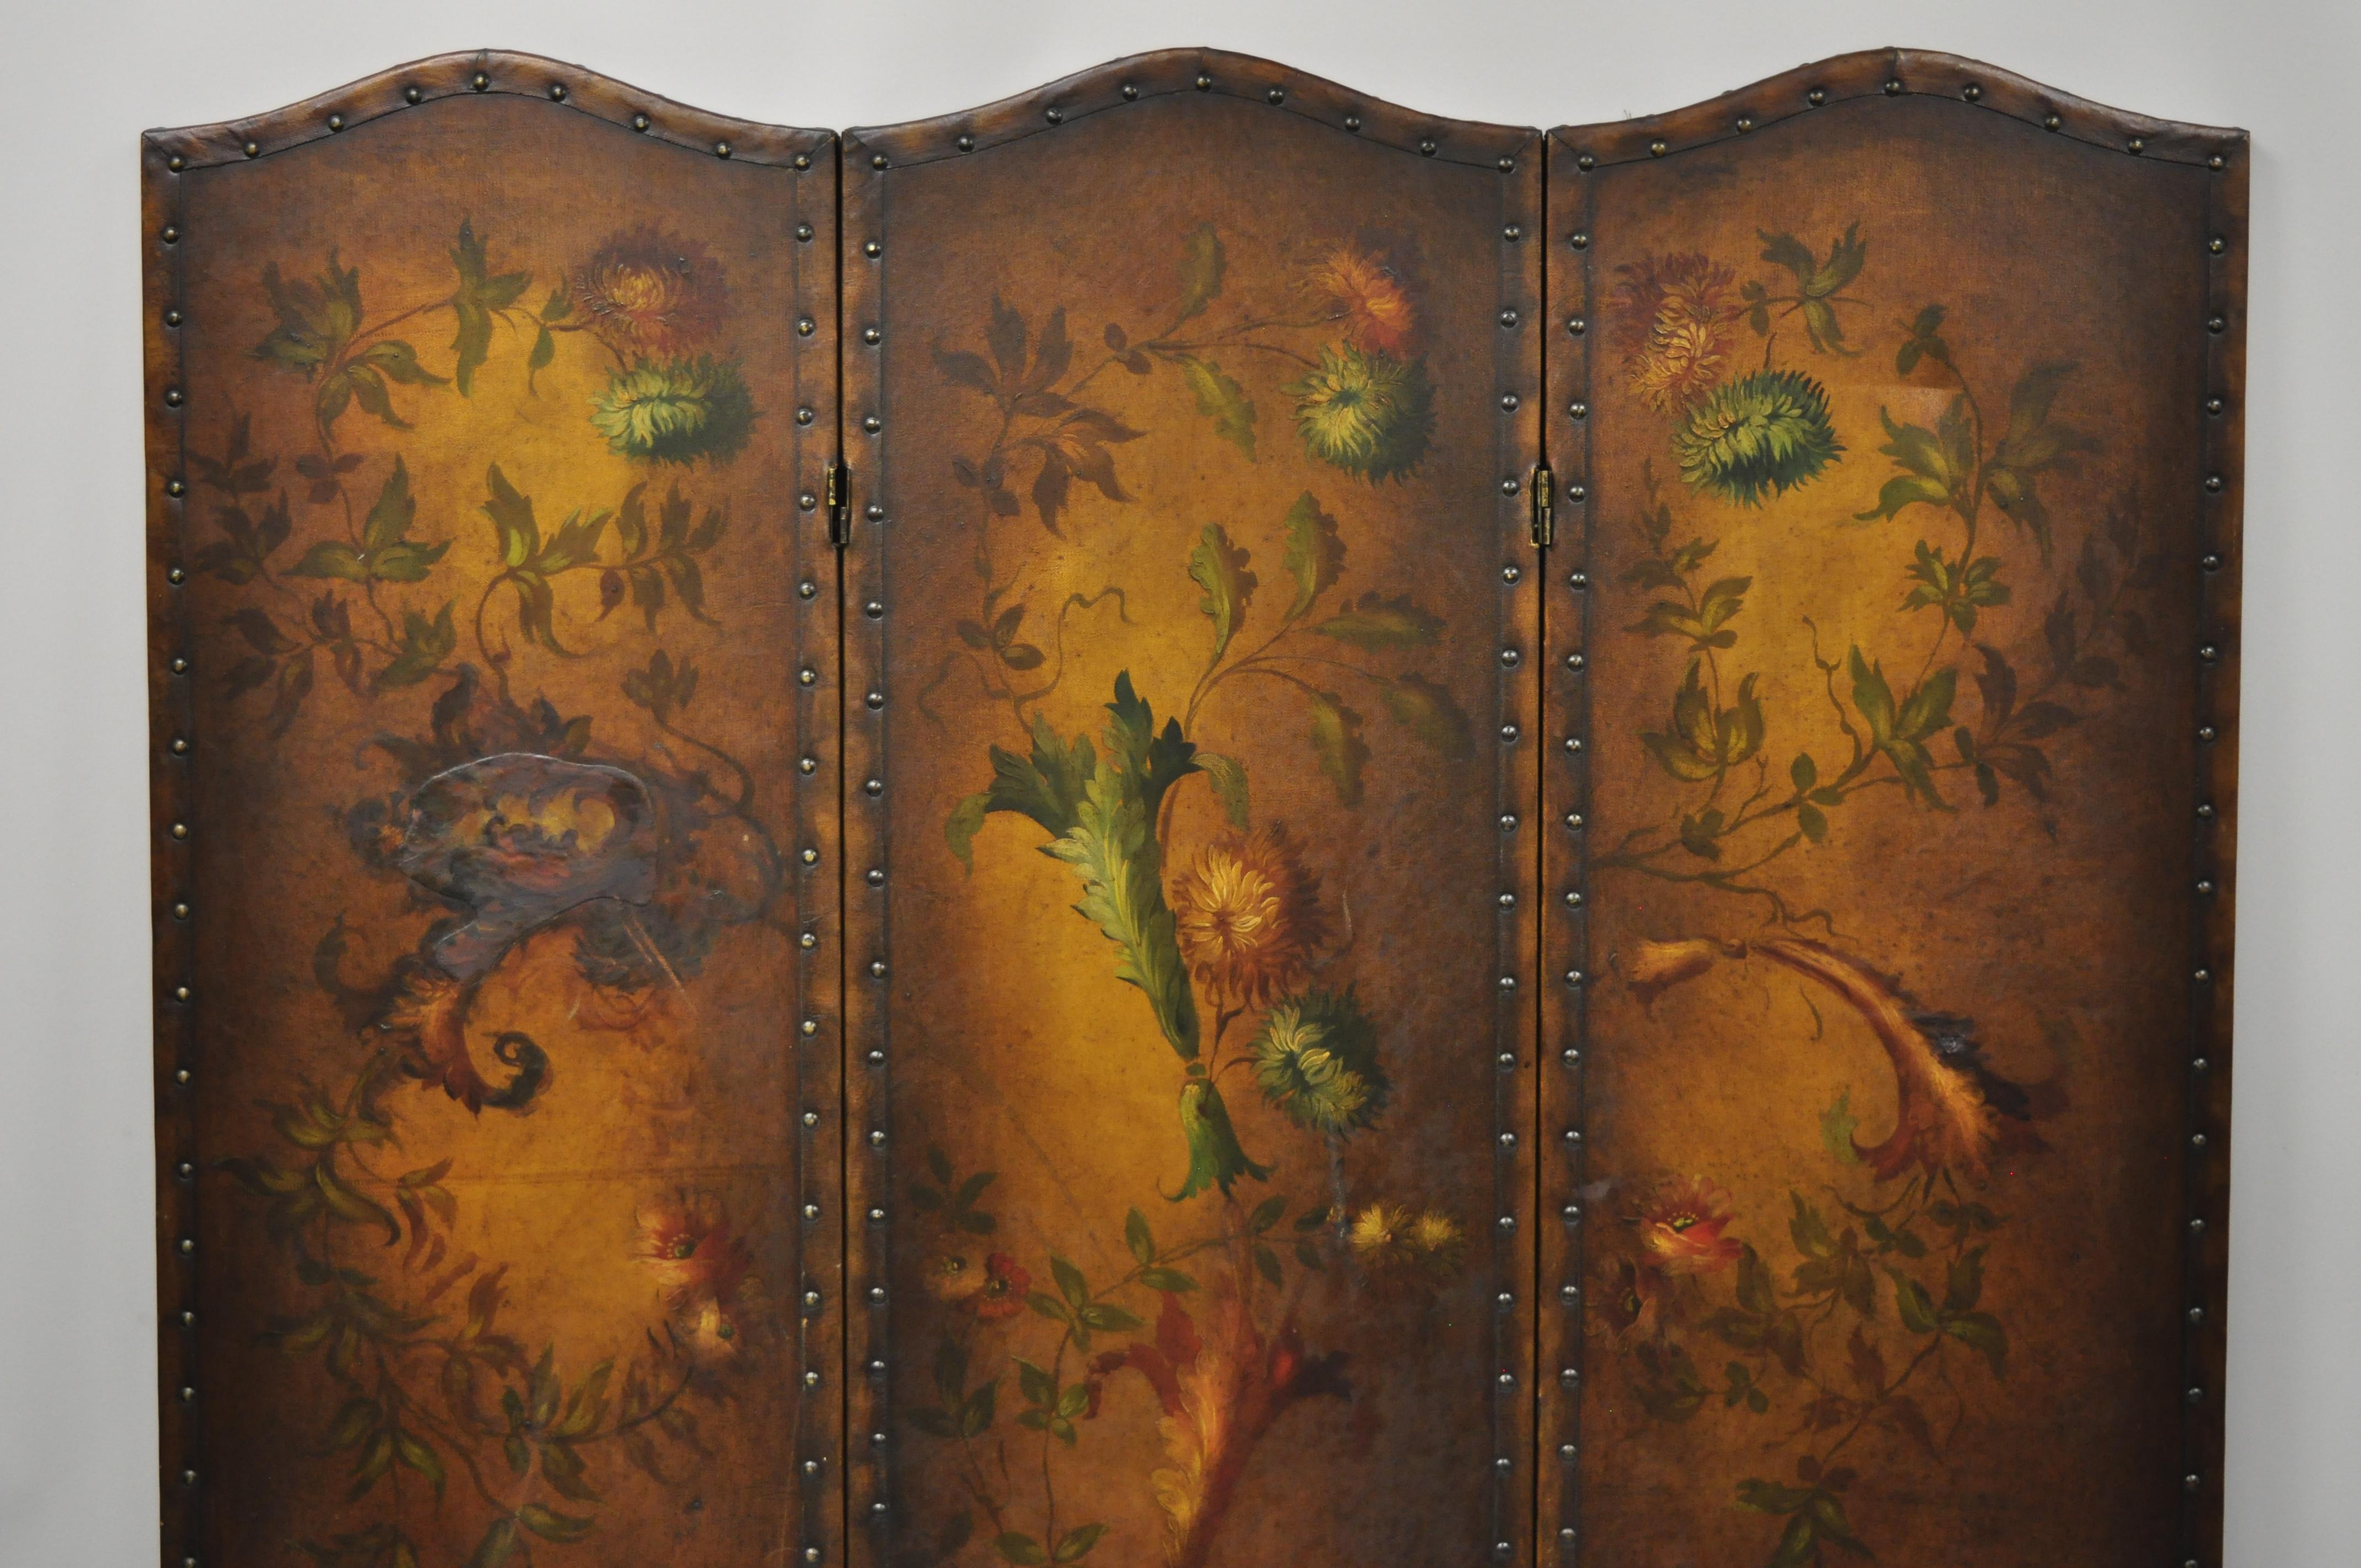 French Art Nouveau Victorian oil on canvas hand painted 3-panel screen room divider. Item features 3 panels, hand painted flowers, folding sections, very nice antique item, circa early 20th century. Measurements: 68.5